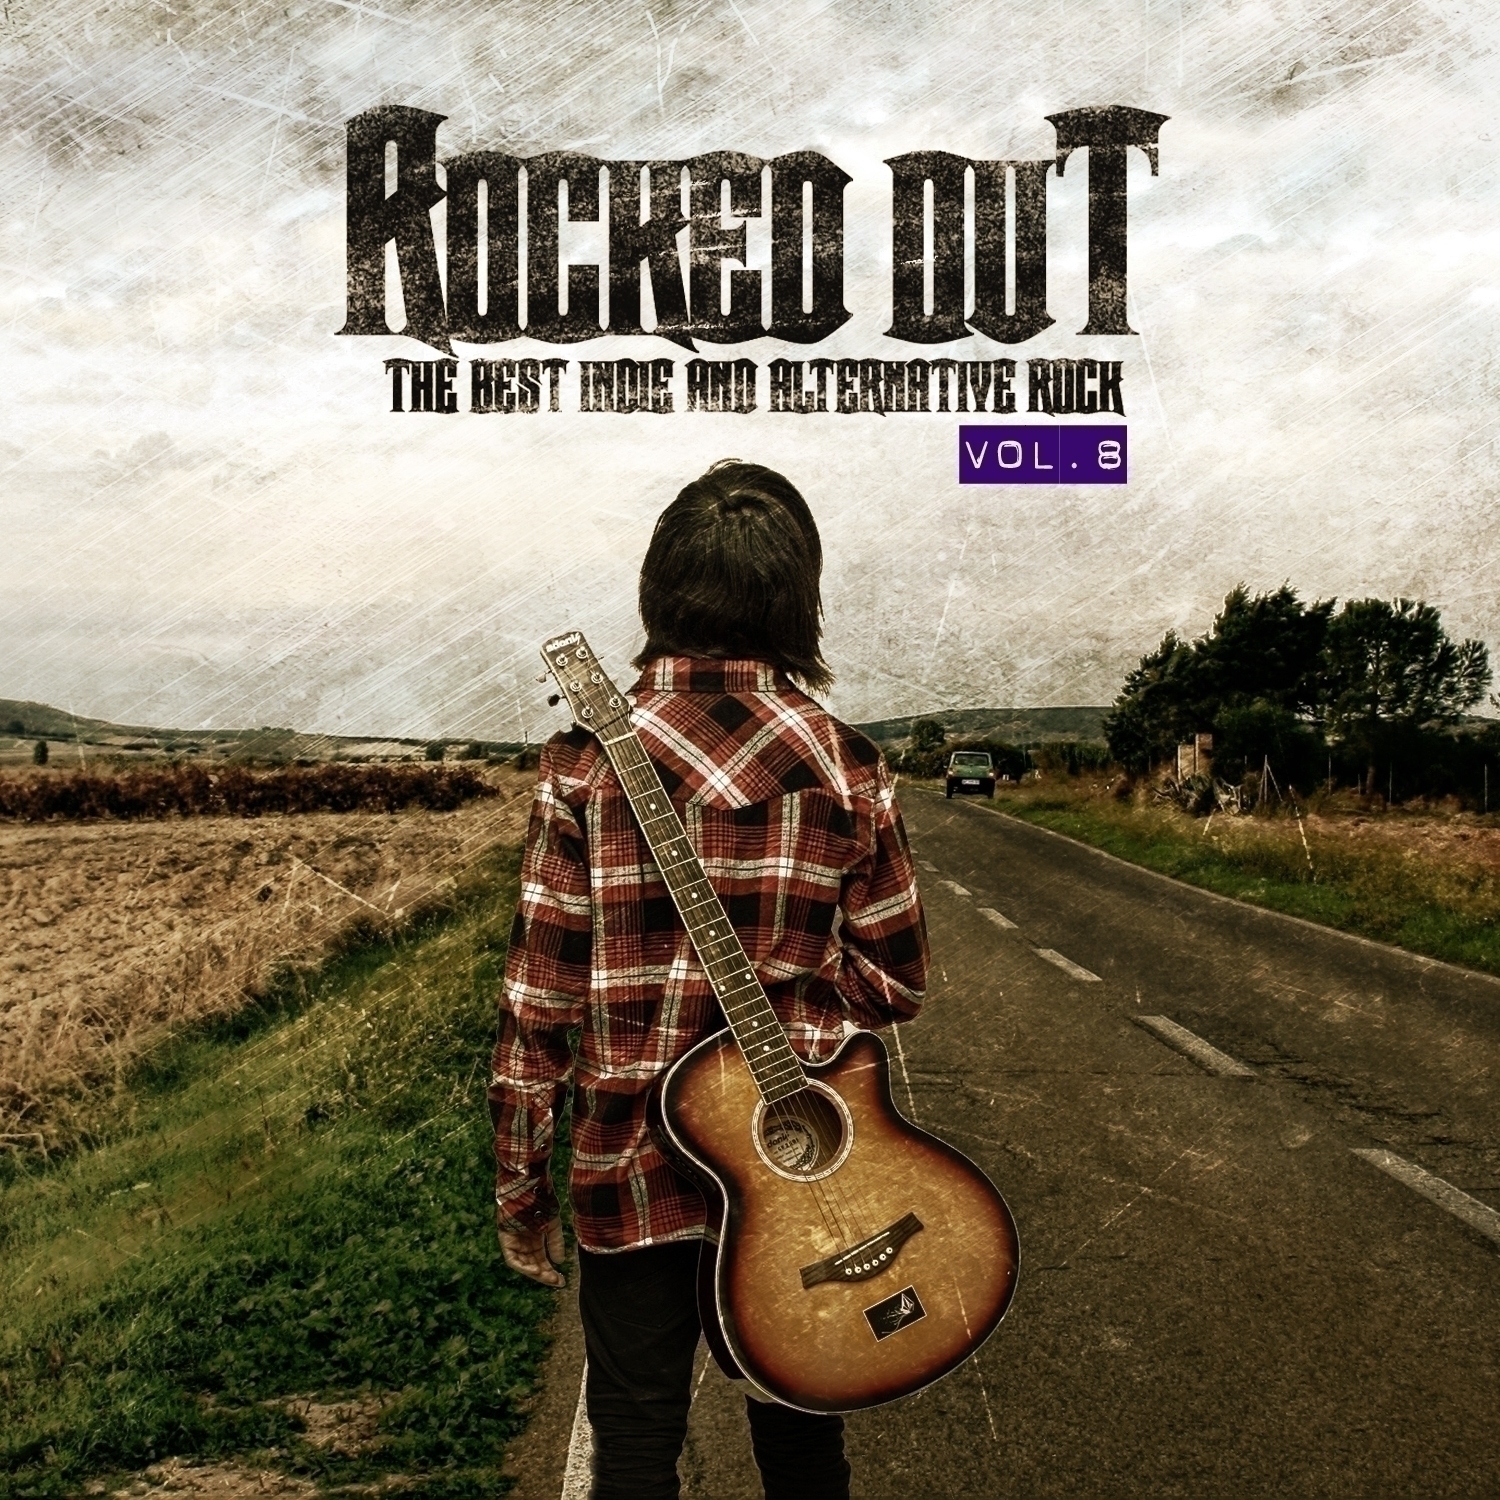 Rocked Out - The Best Indie and Alternative Rock Vol. 8